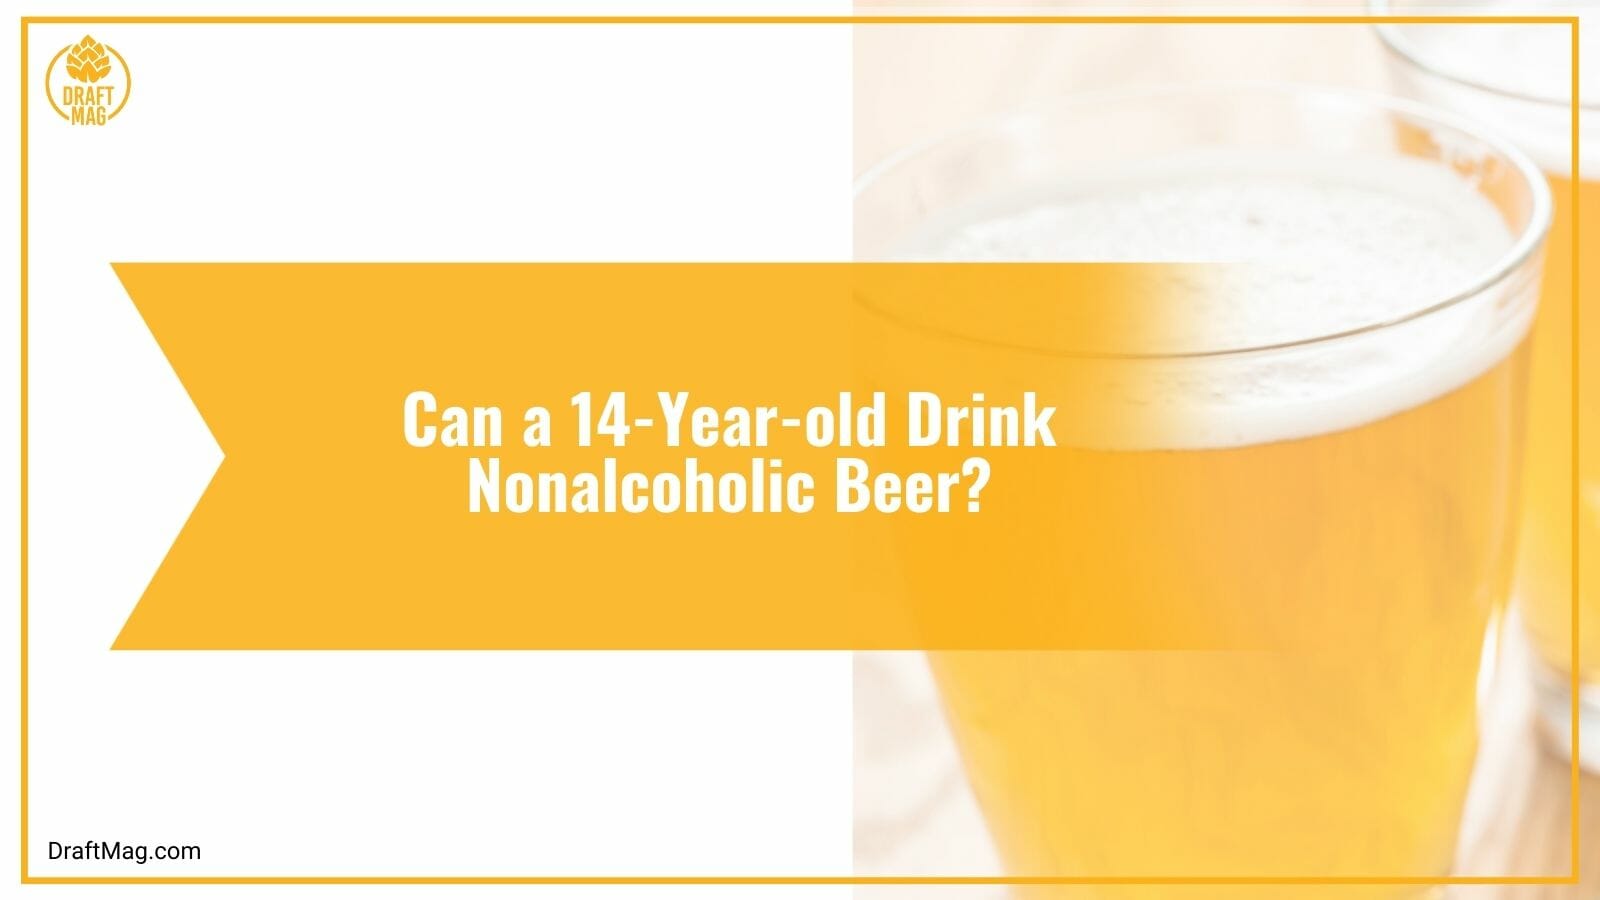 Can a 14-Year-old Drink Nonalcoholic Beer